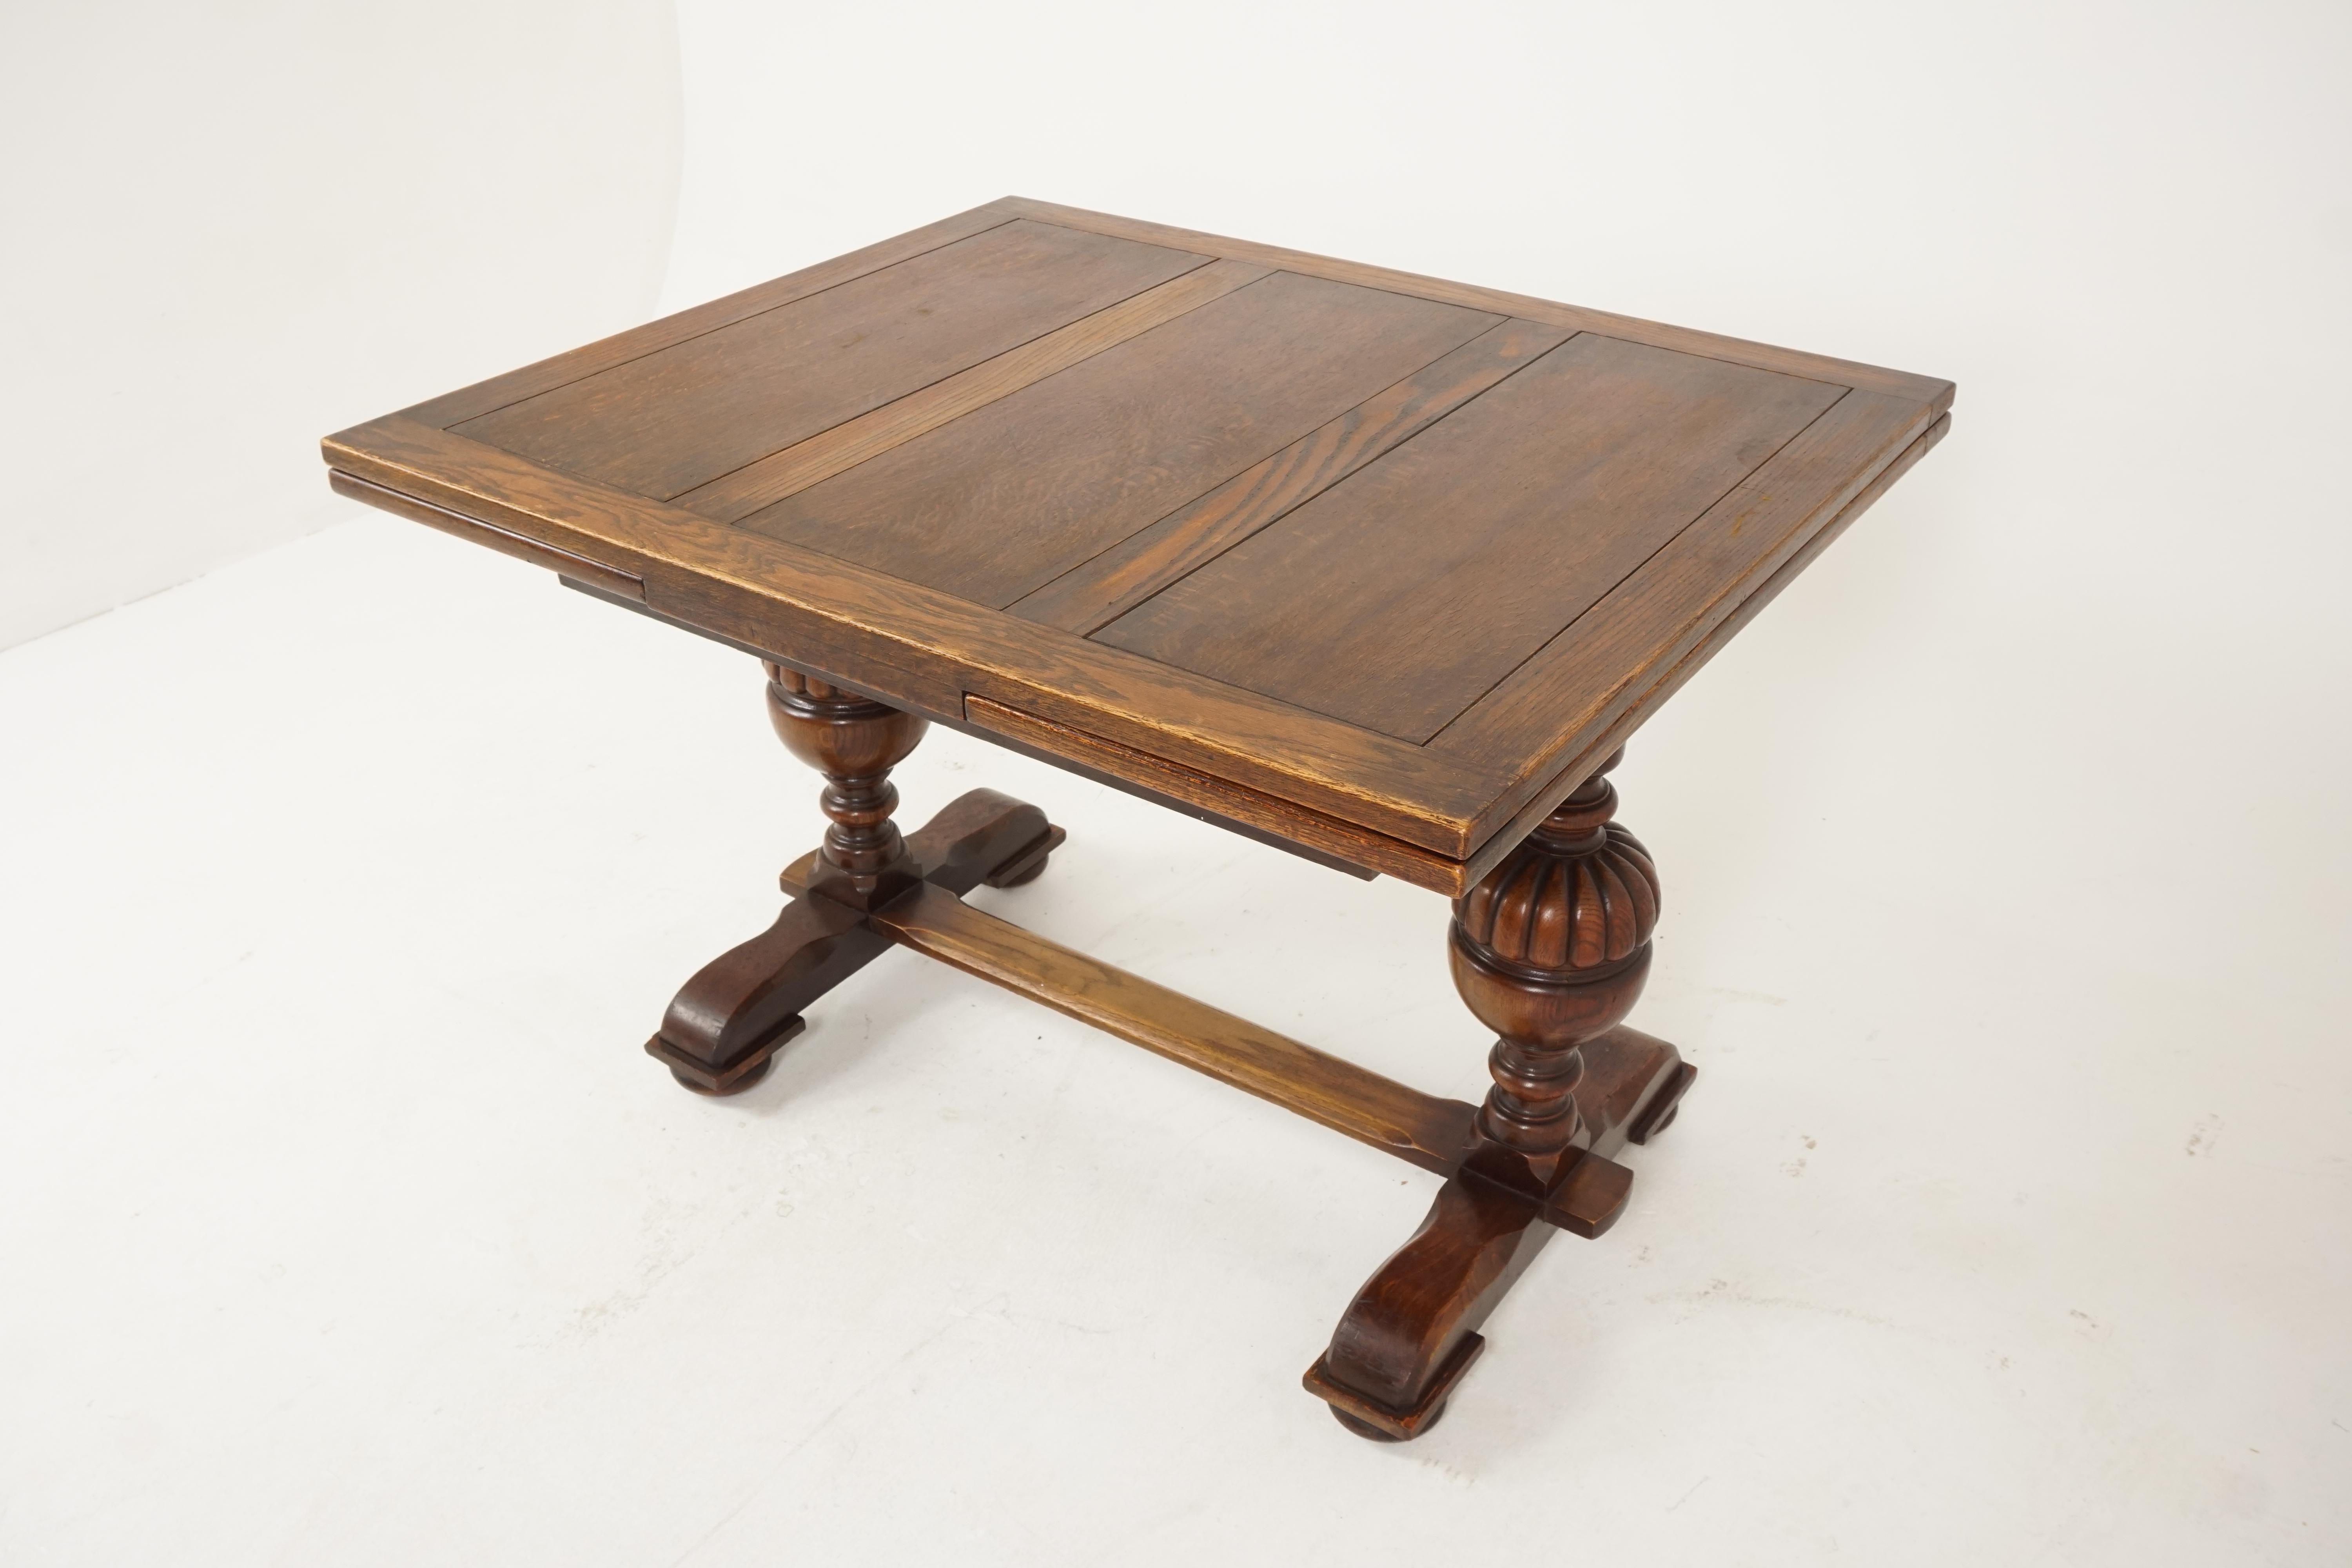 Antique oak refectory table, draw leaf, Scotland 1930, B2416

Scotland 1930
Solid oak and veneer
Original finish
Paneled oak top
Pair of hidden leaves underneath
Leaves pull out to extend each end of the table by 15